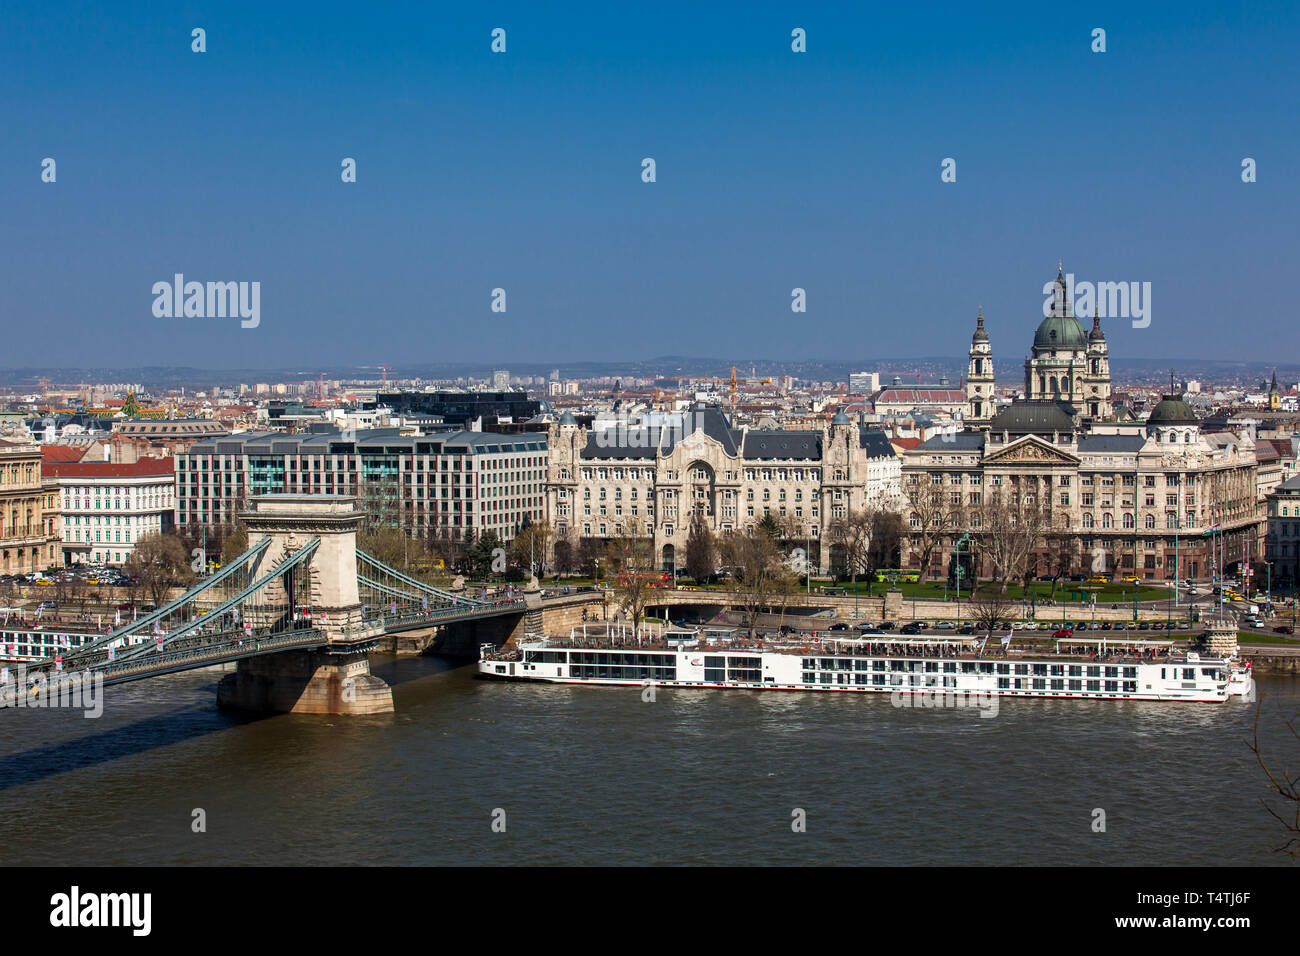 BUDAPEST, HUNGARY - APRIL, 2018: View of the Pest bank of Budapest city Stock Photo